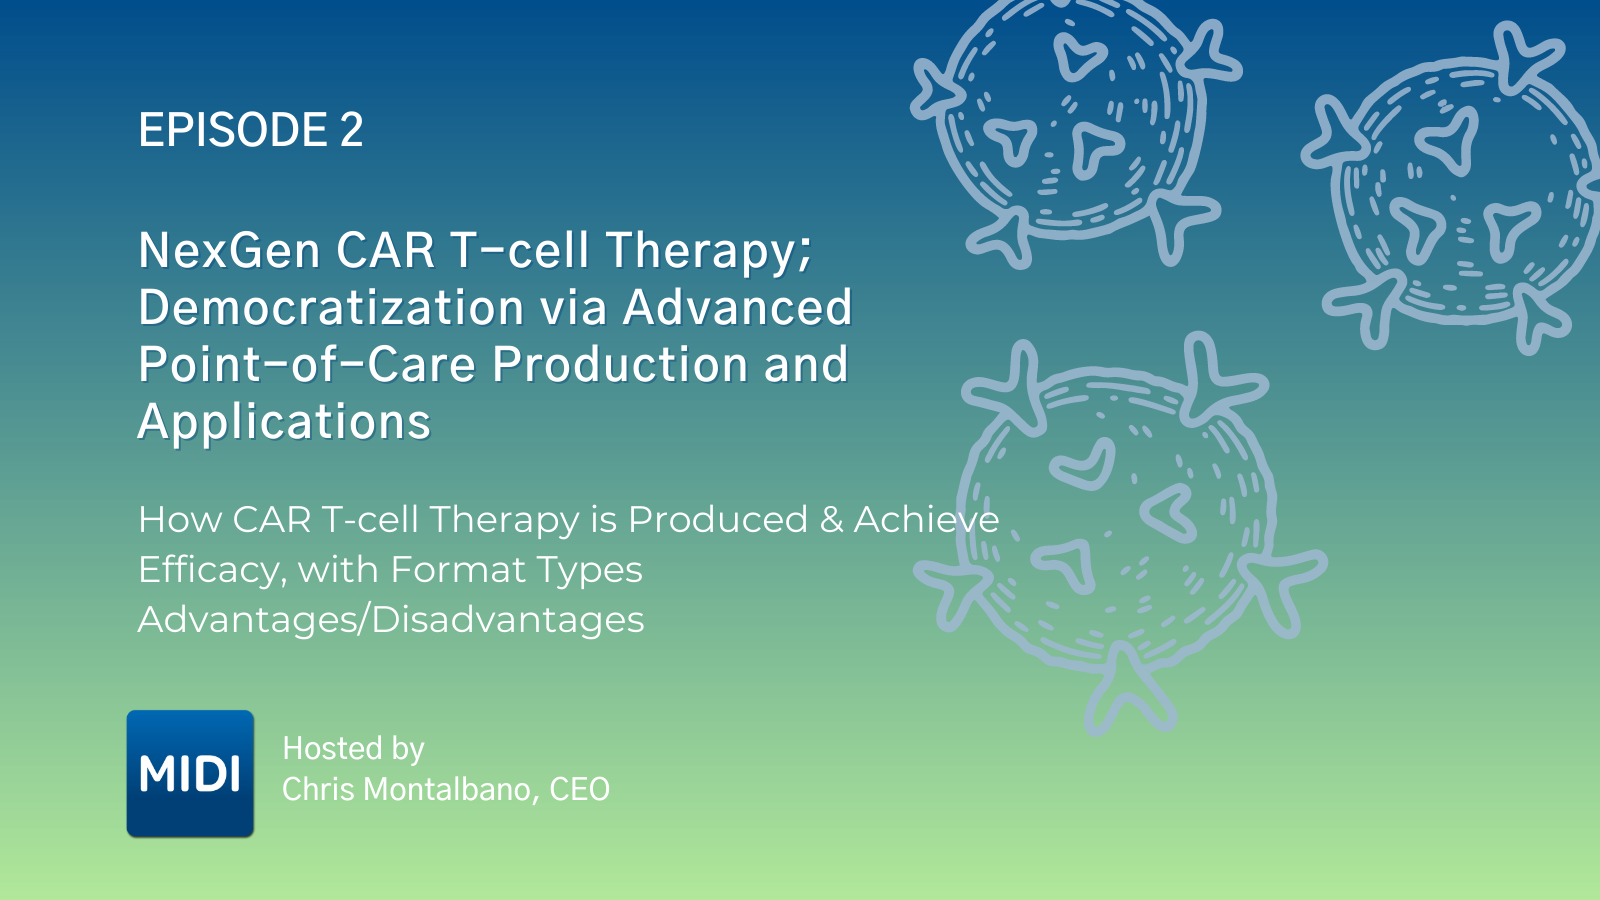 Next-Generation CAR T-cell Therapy: Production & Format Types}